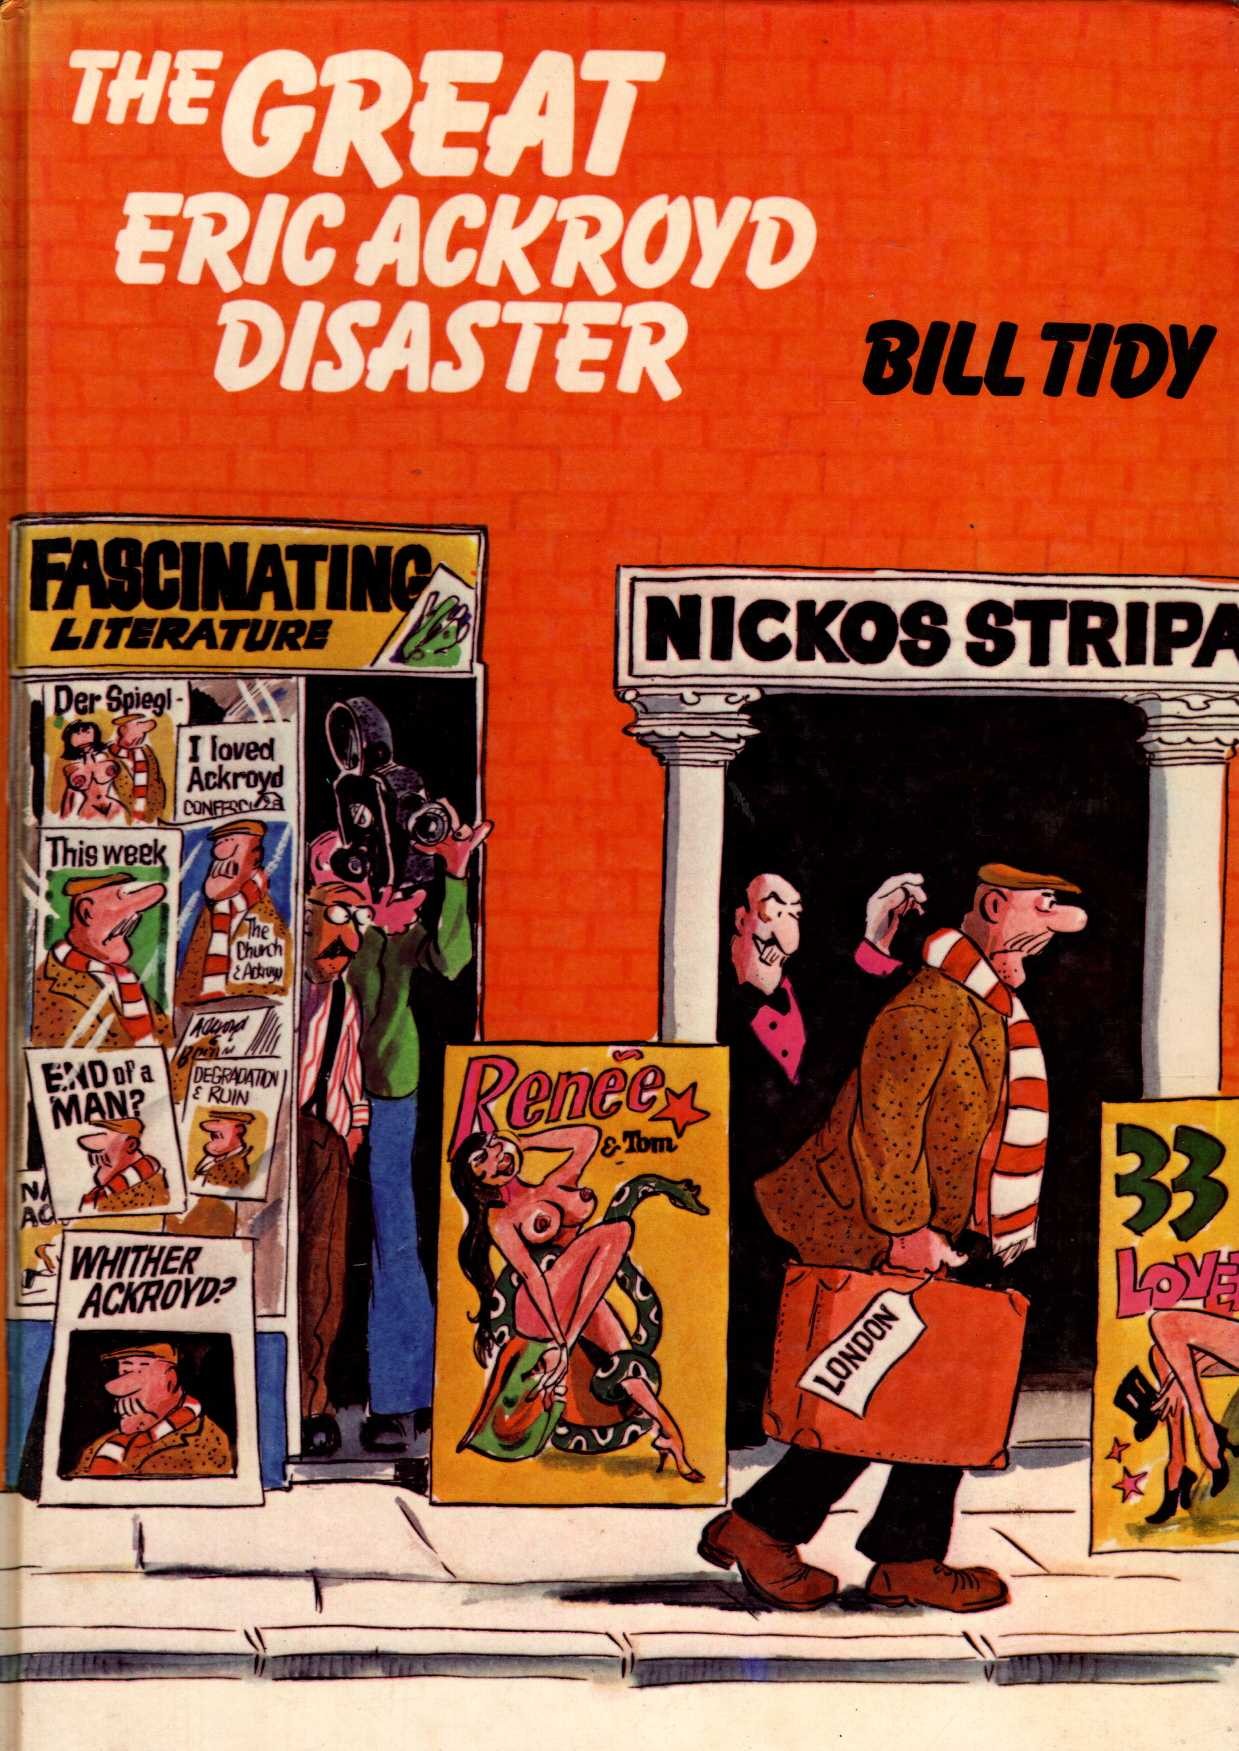 THE GREAT ERIC ACKROYD DISASTER front book cover image